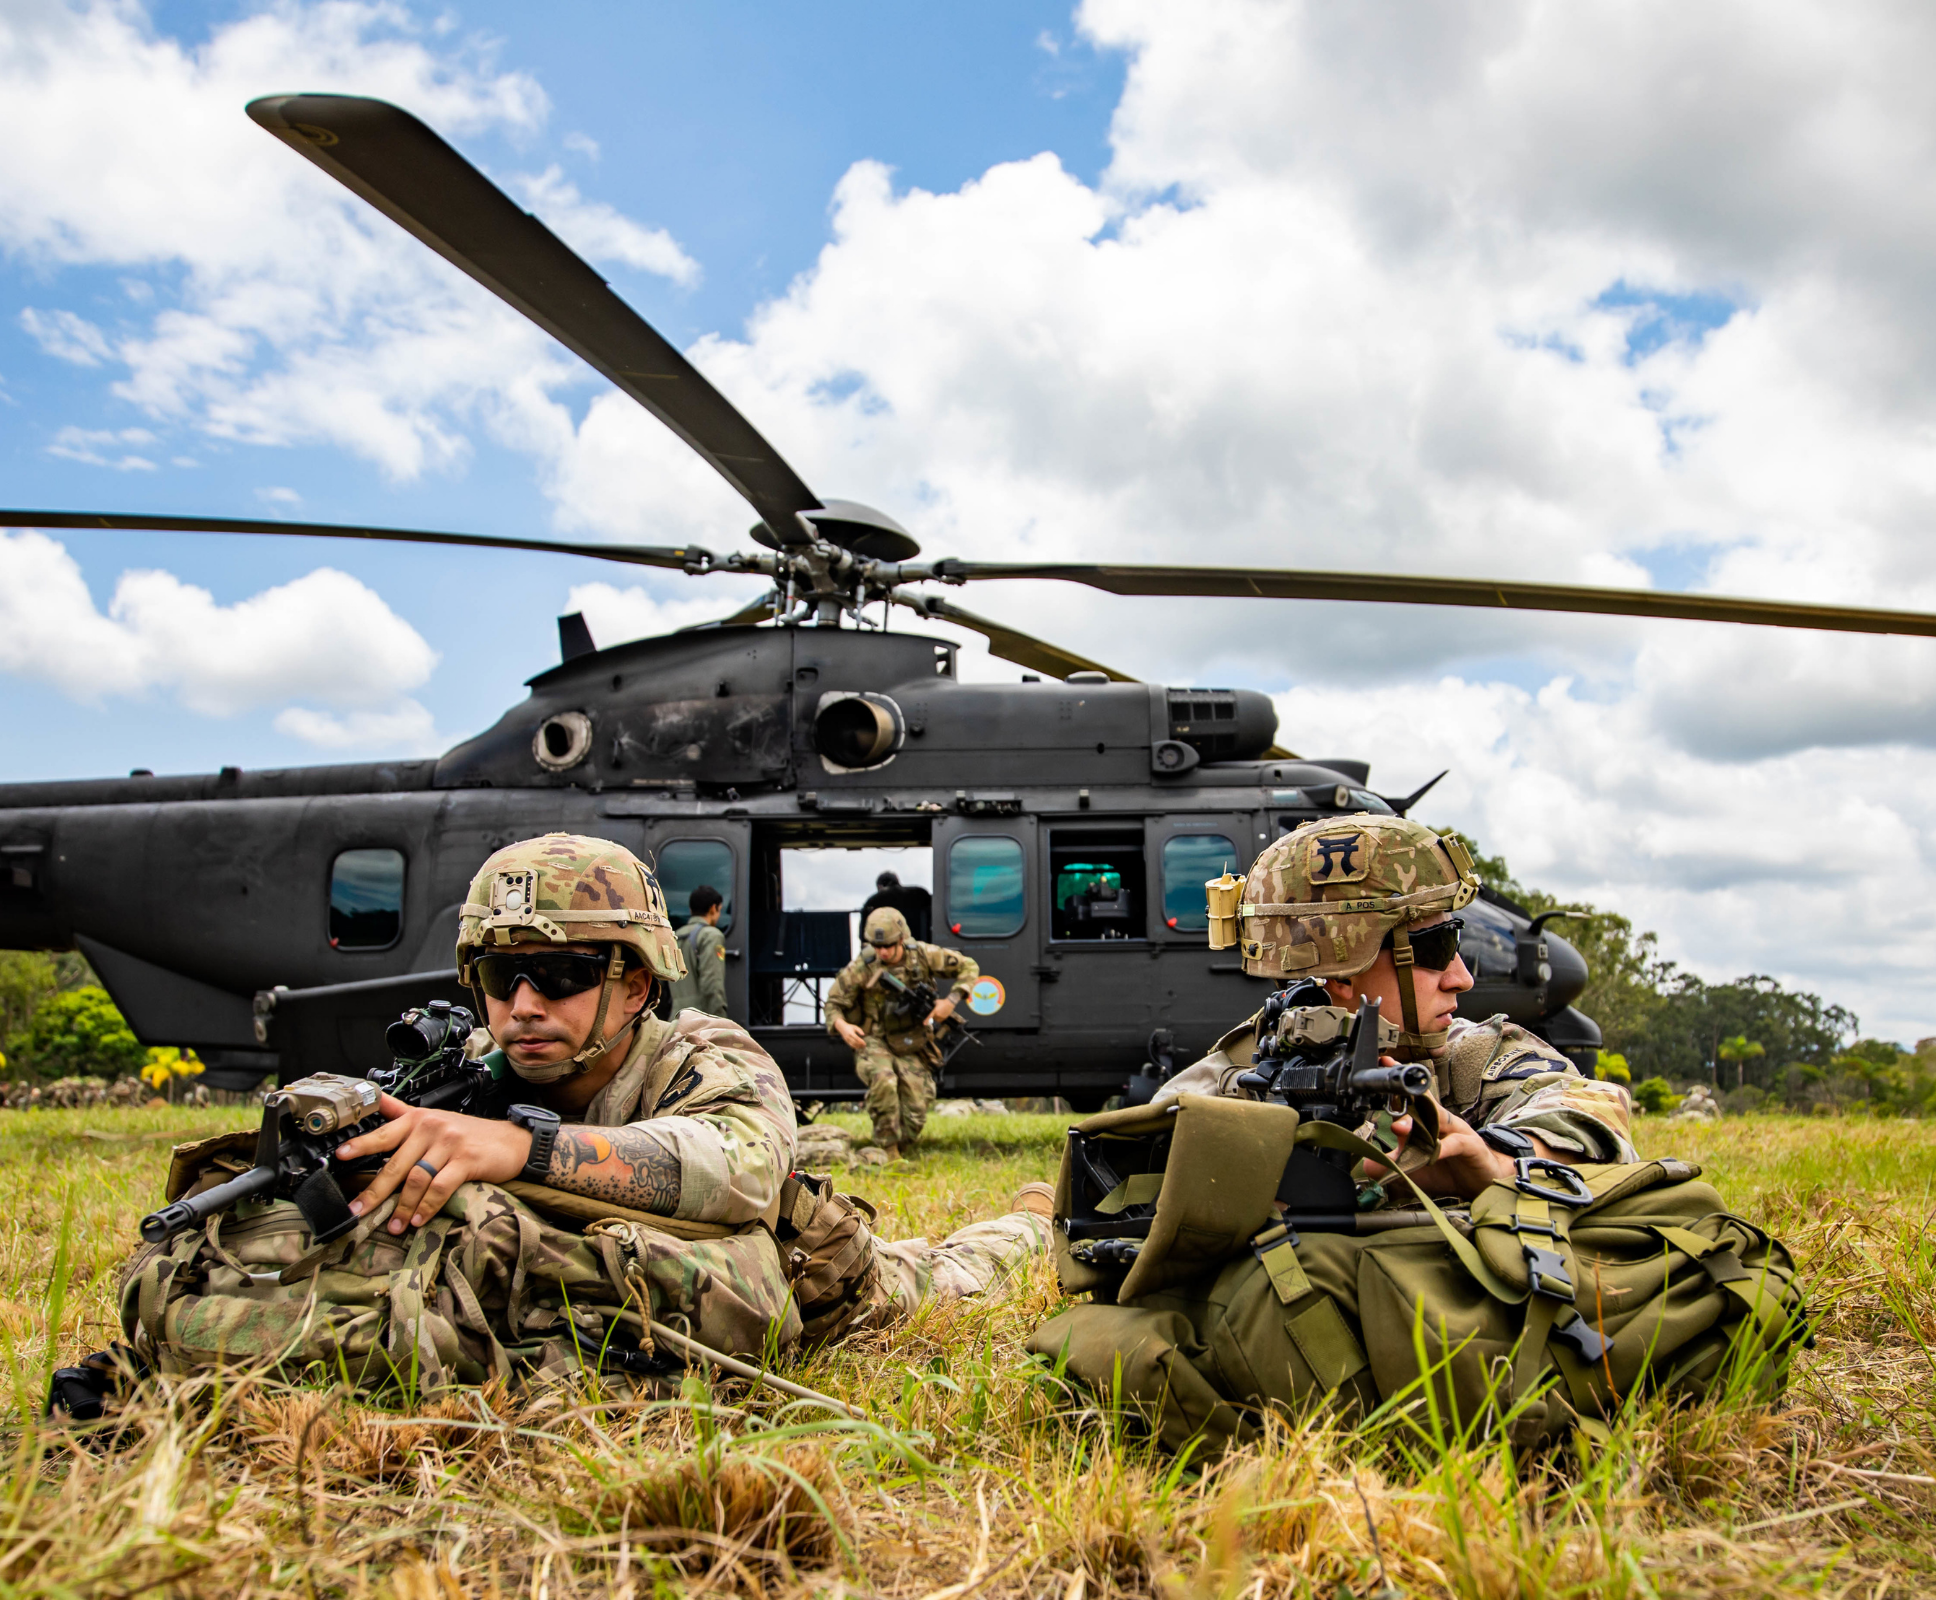 Soldiers posing outside helicopter, weapons in hand